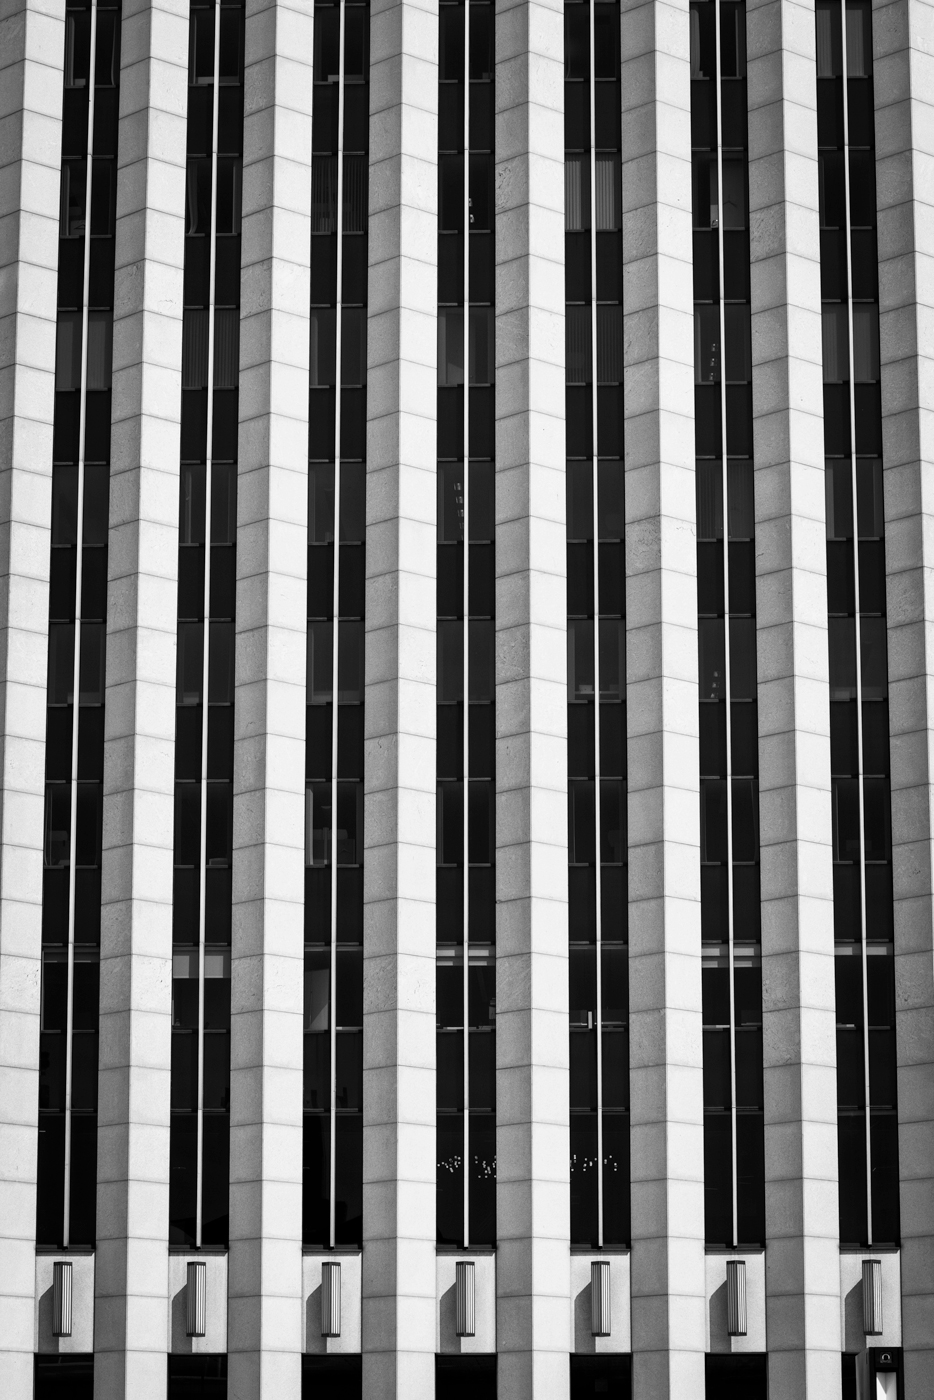 black and white abstract image of the Aon Center in Chicago